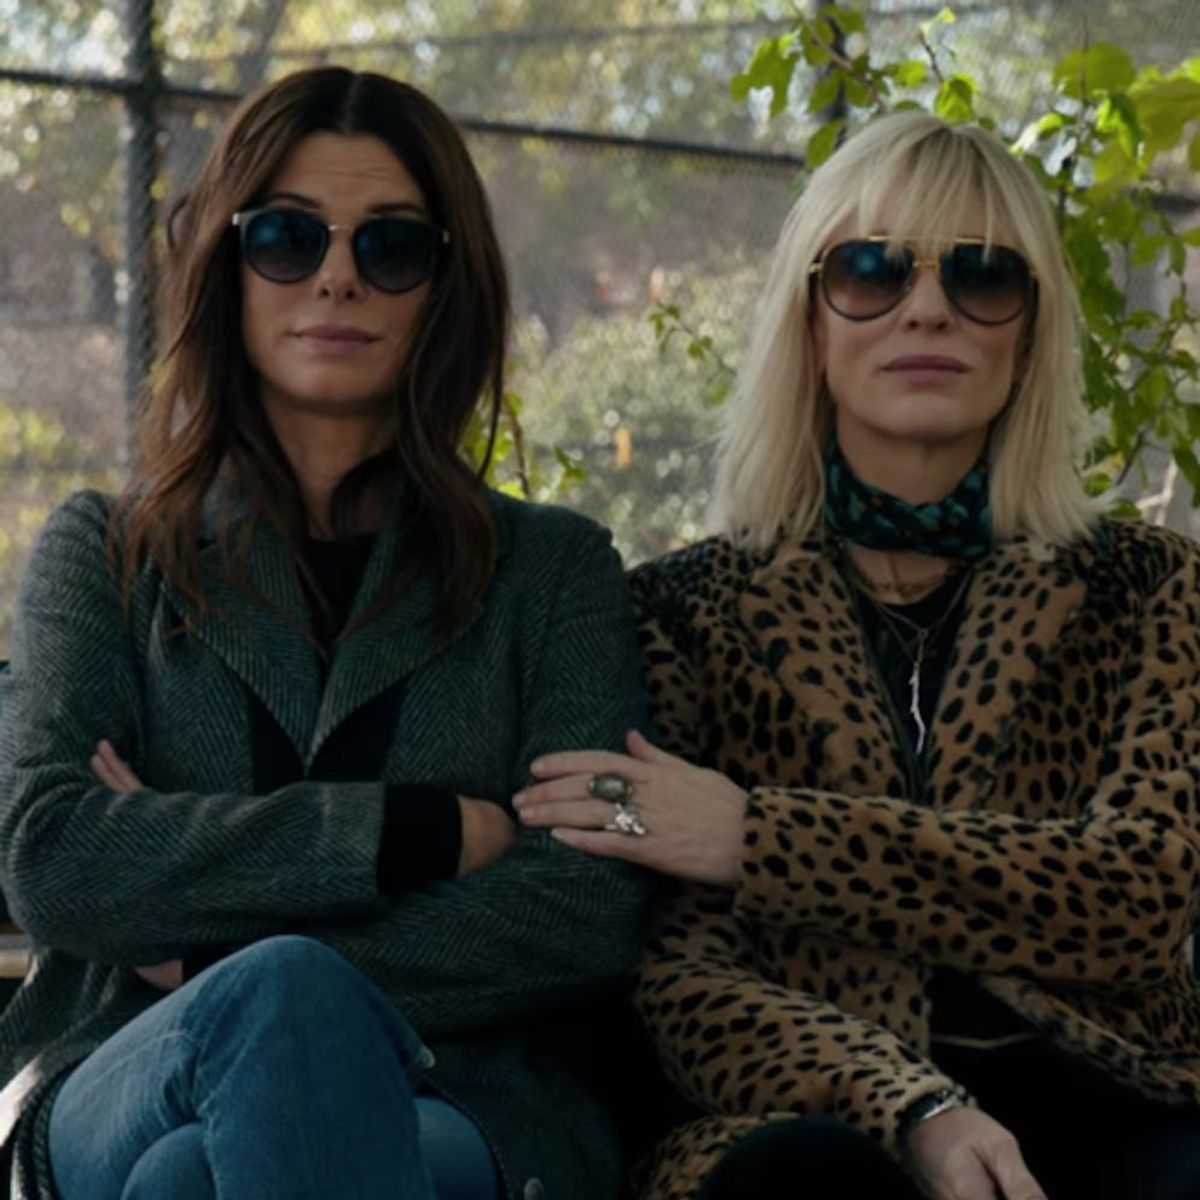 The Full ‘Ocean’s 8’ Trailer Is Here and We Just Want to Rewatch It on Repeat